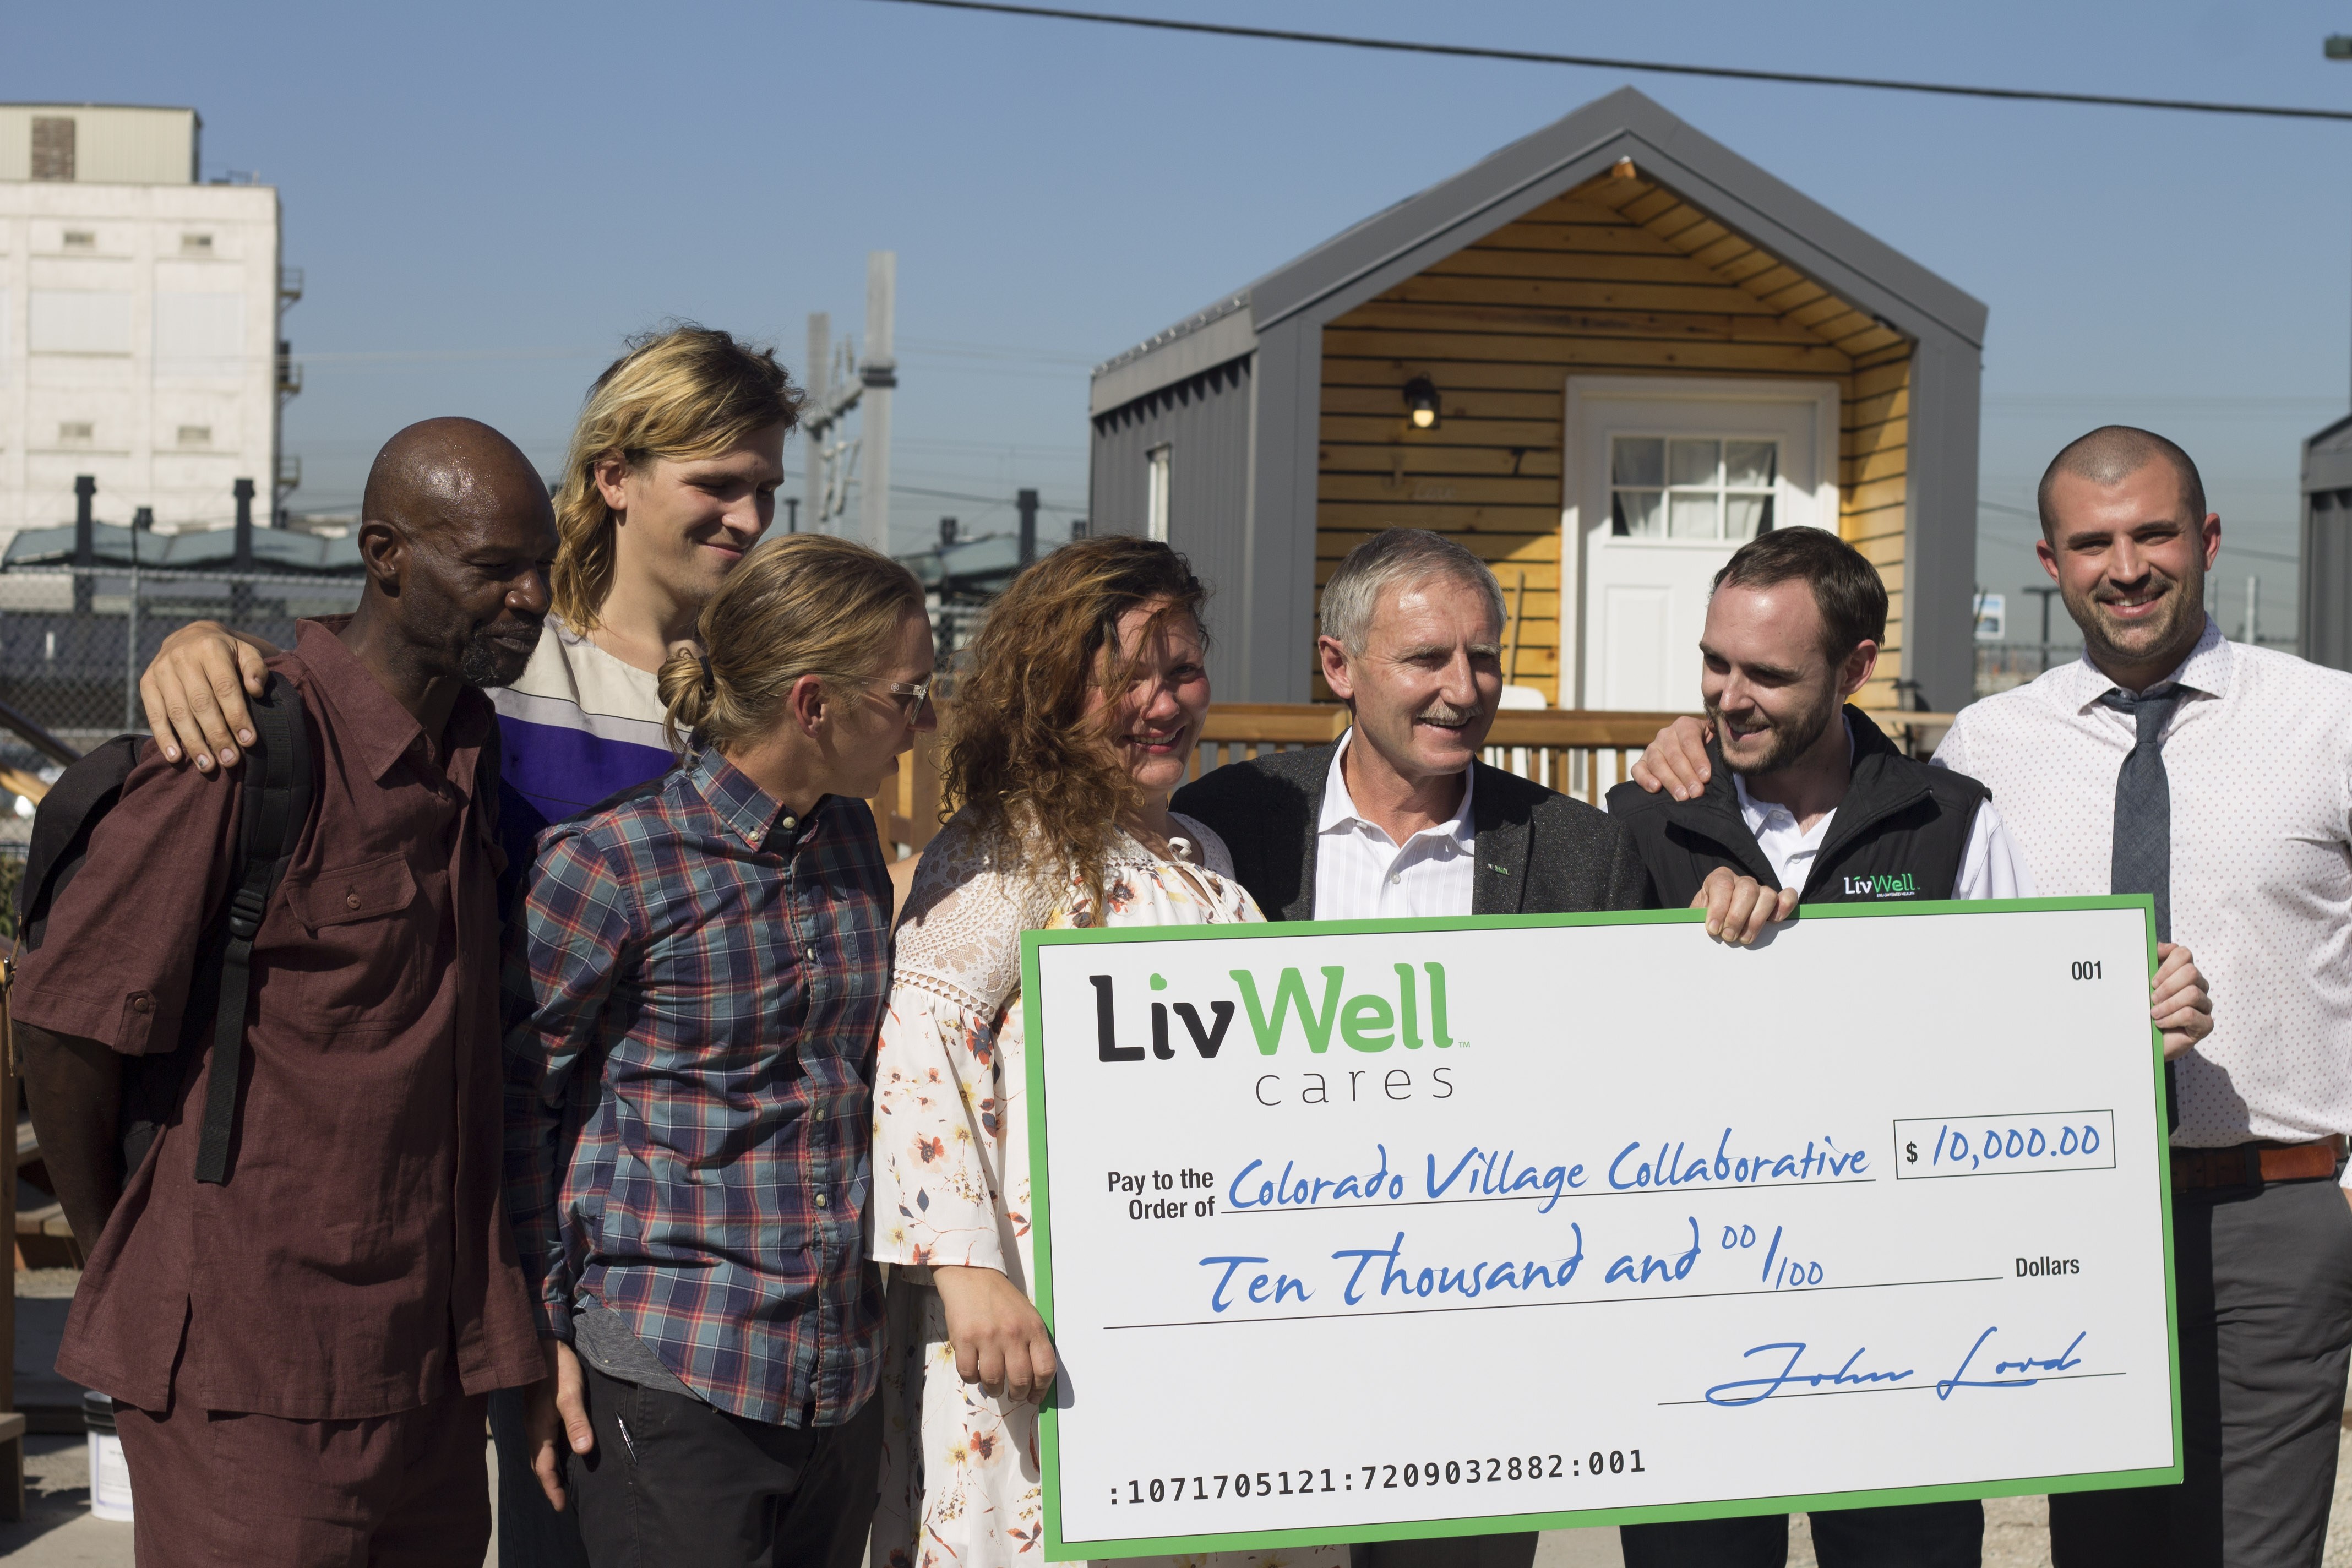 LivWell Cares